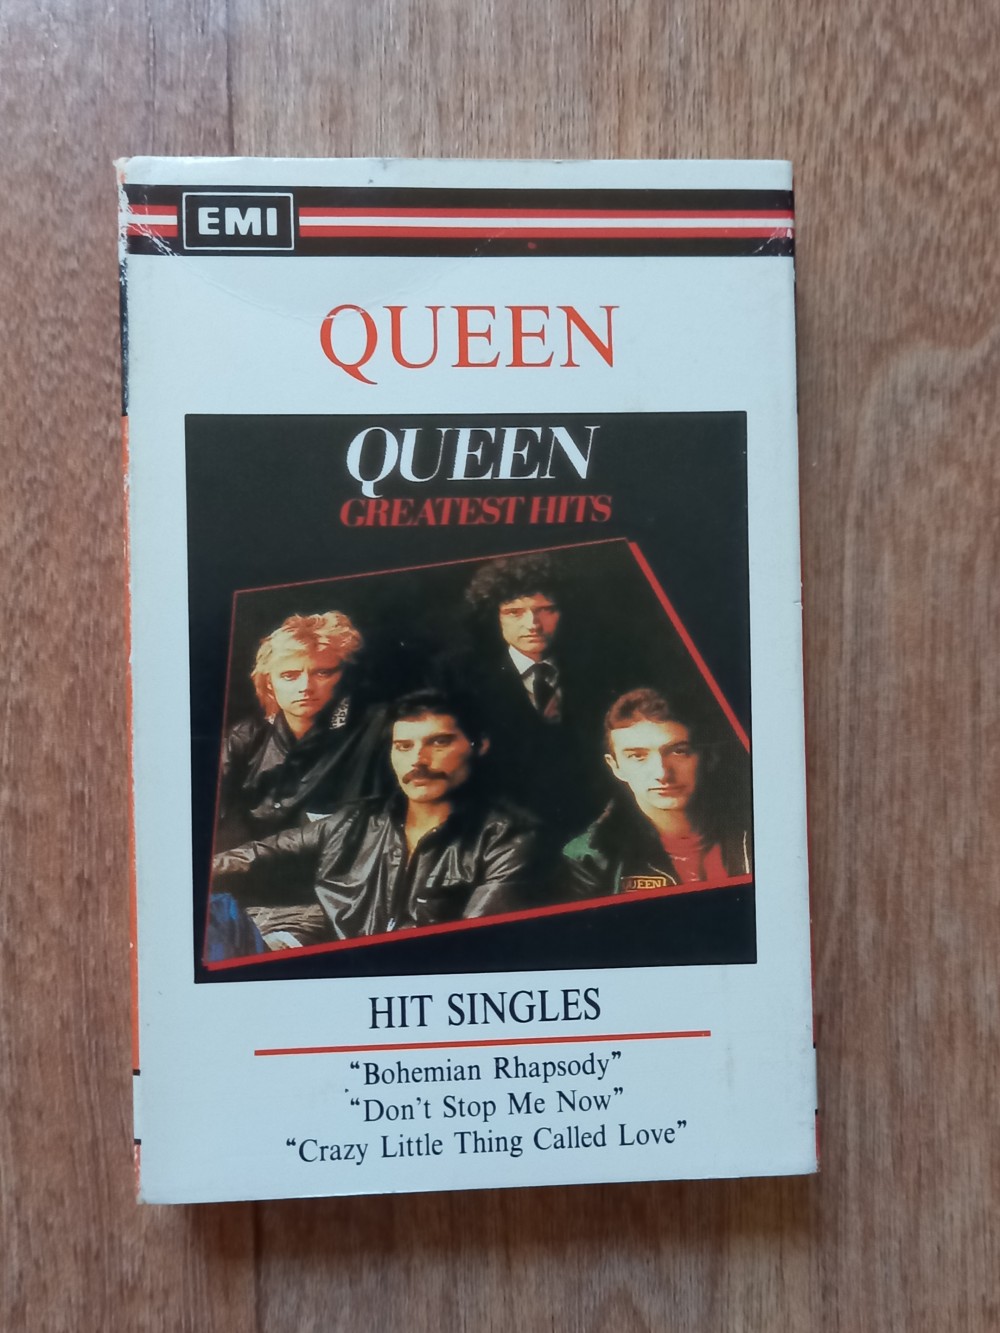 Queen - Greatest Hits Cassette Photo